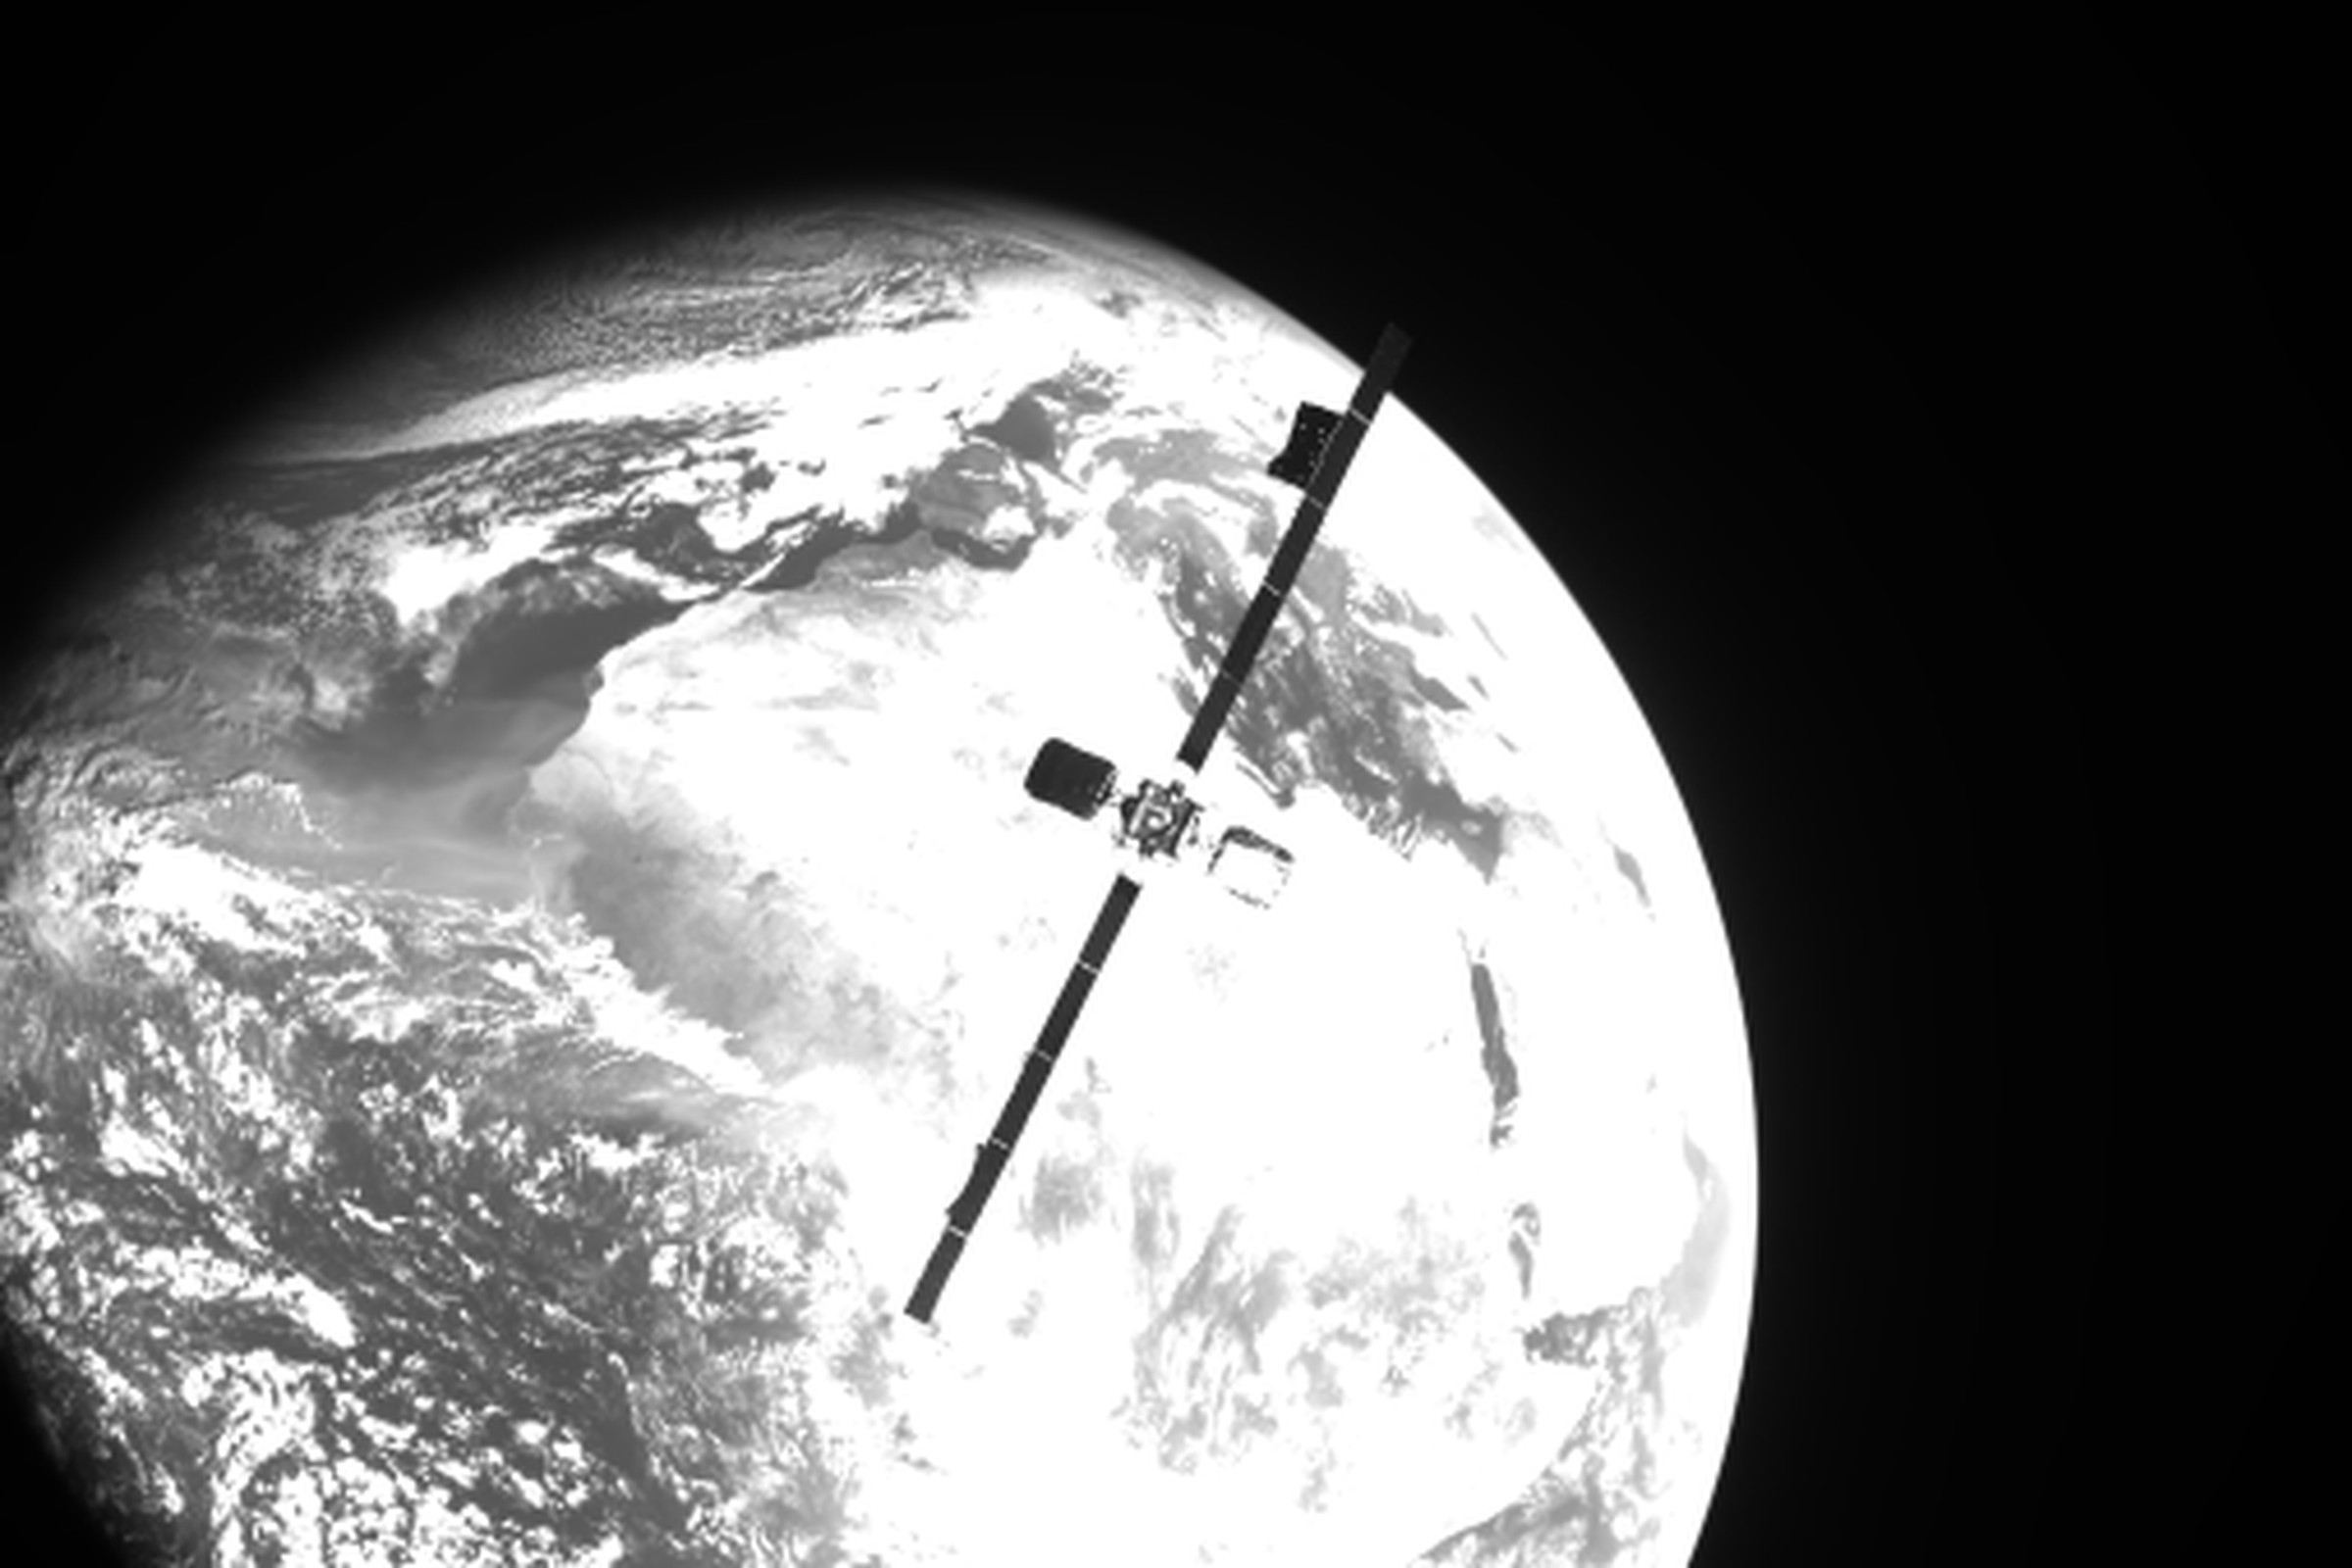 An image of Intelsat’s IS-10-02 satellite taken by Northrop’s MEV-2 as it approached for docking.